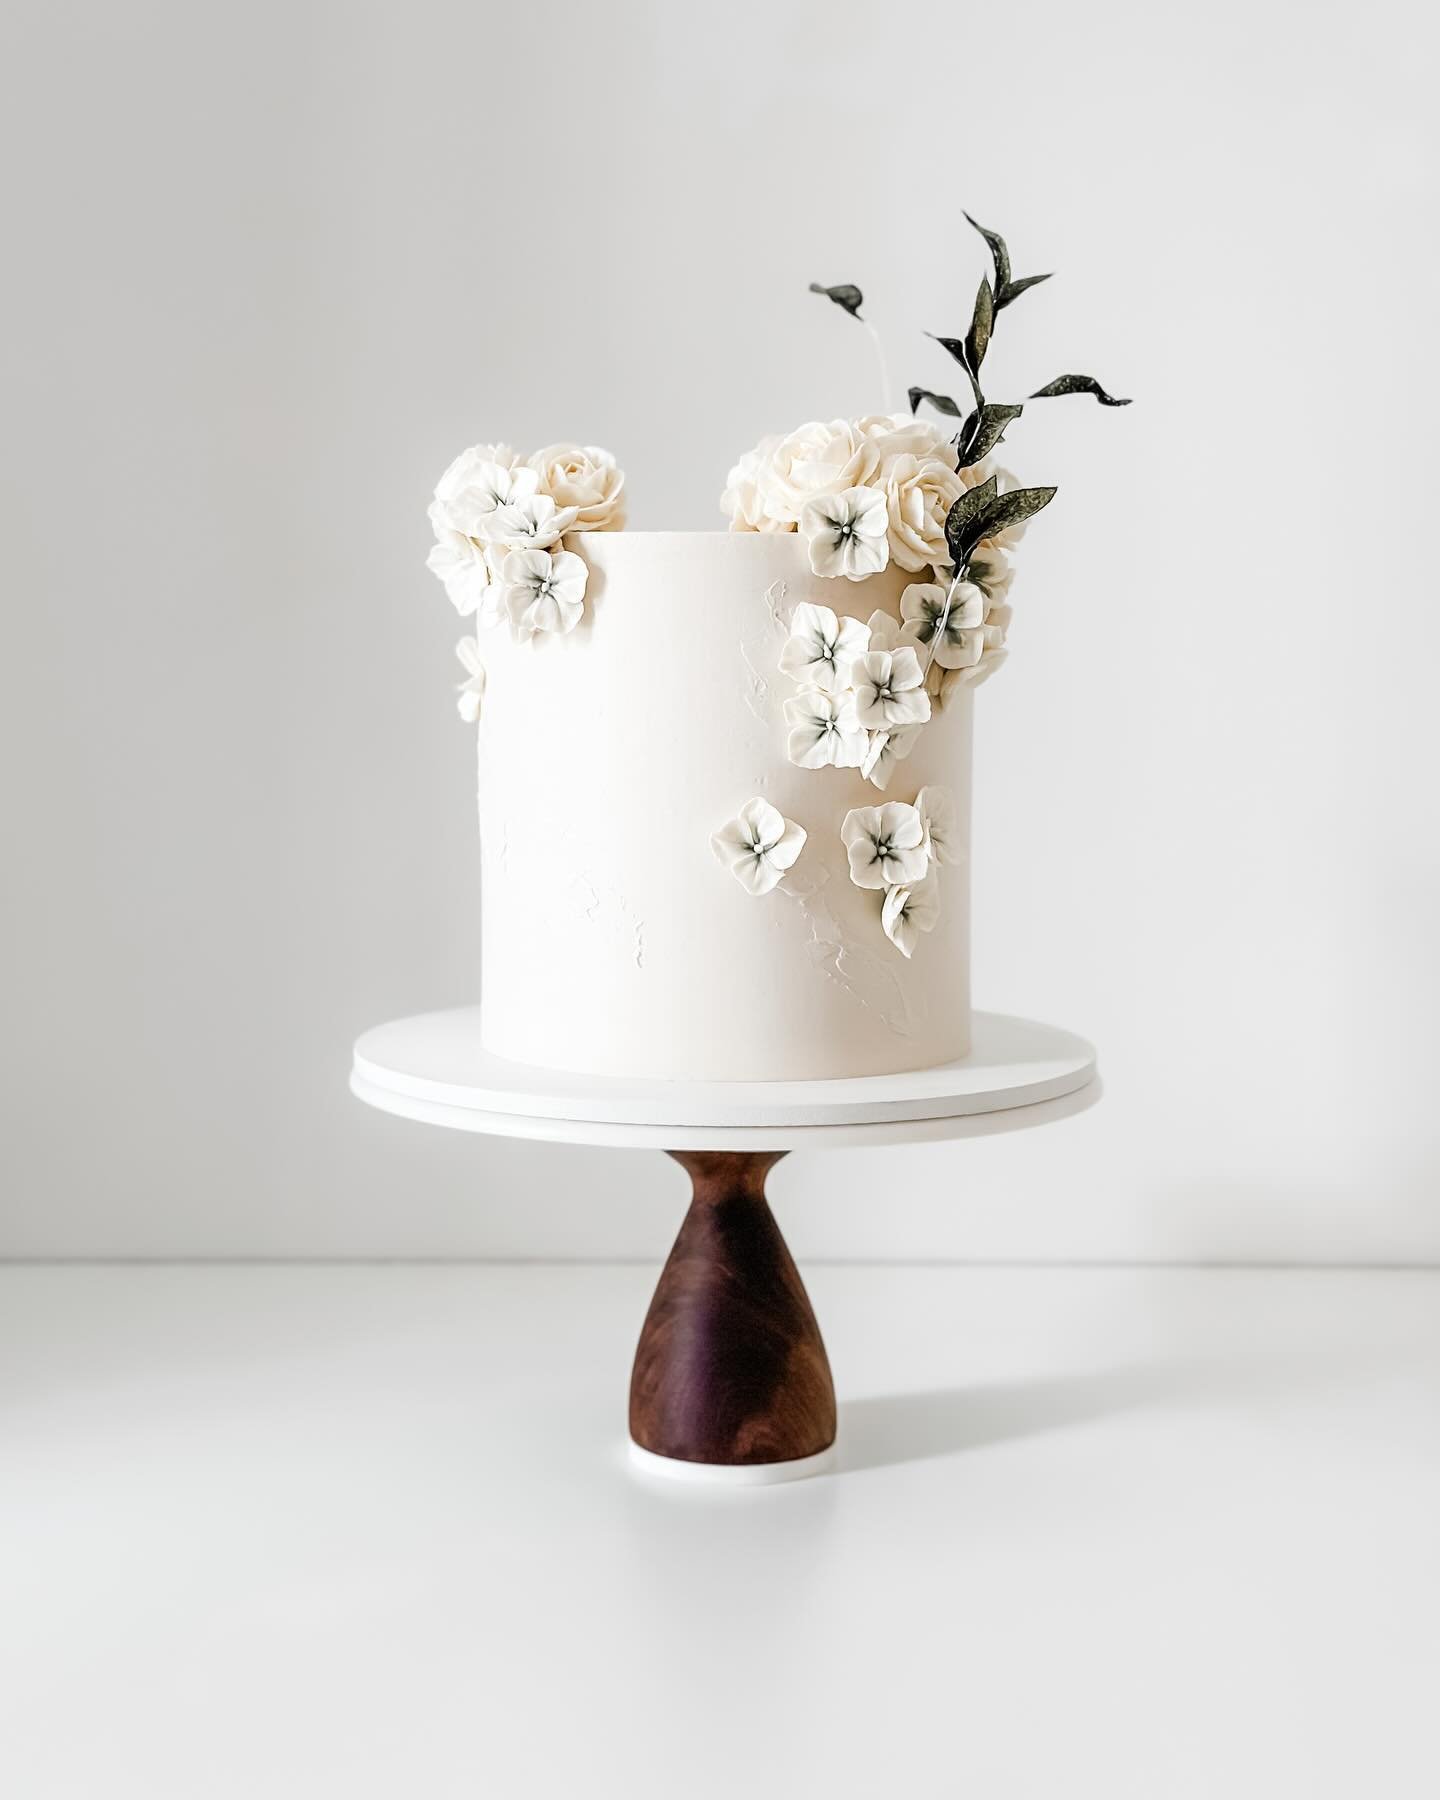 When you take the top tier of your wedding cake back to your hotel room to enjoy later, but when you return there&rsquo;s only crumbs left! 😱 So here&rsquo;s a re-creation of the top tier from Lauren + Brian&rsquo;s big day&mdash;guard it with your 